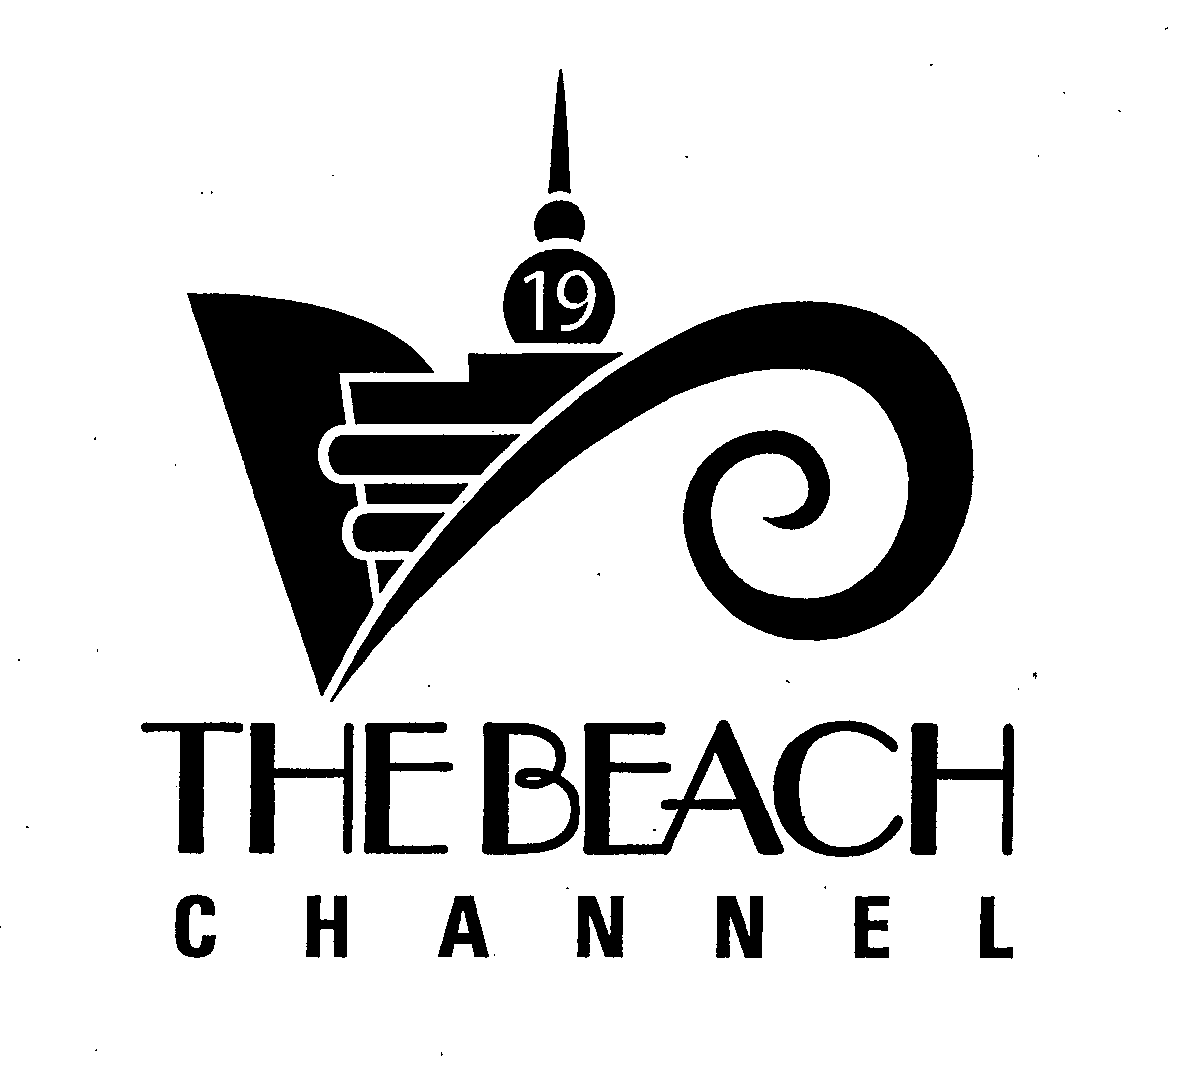  19 THE BEACH CHANNEL